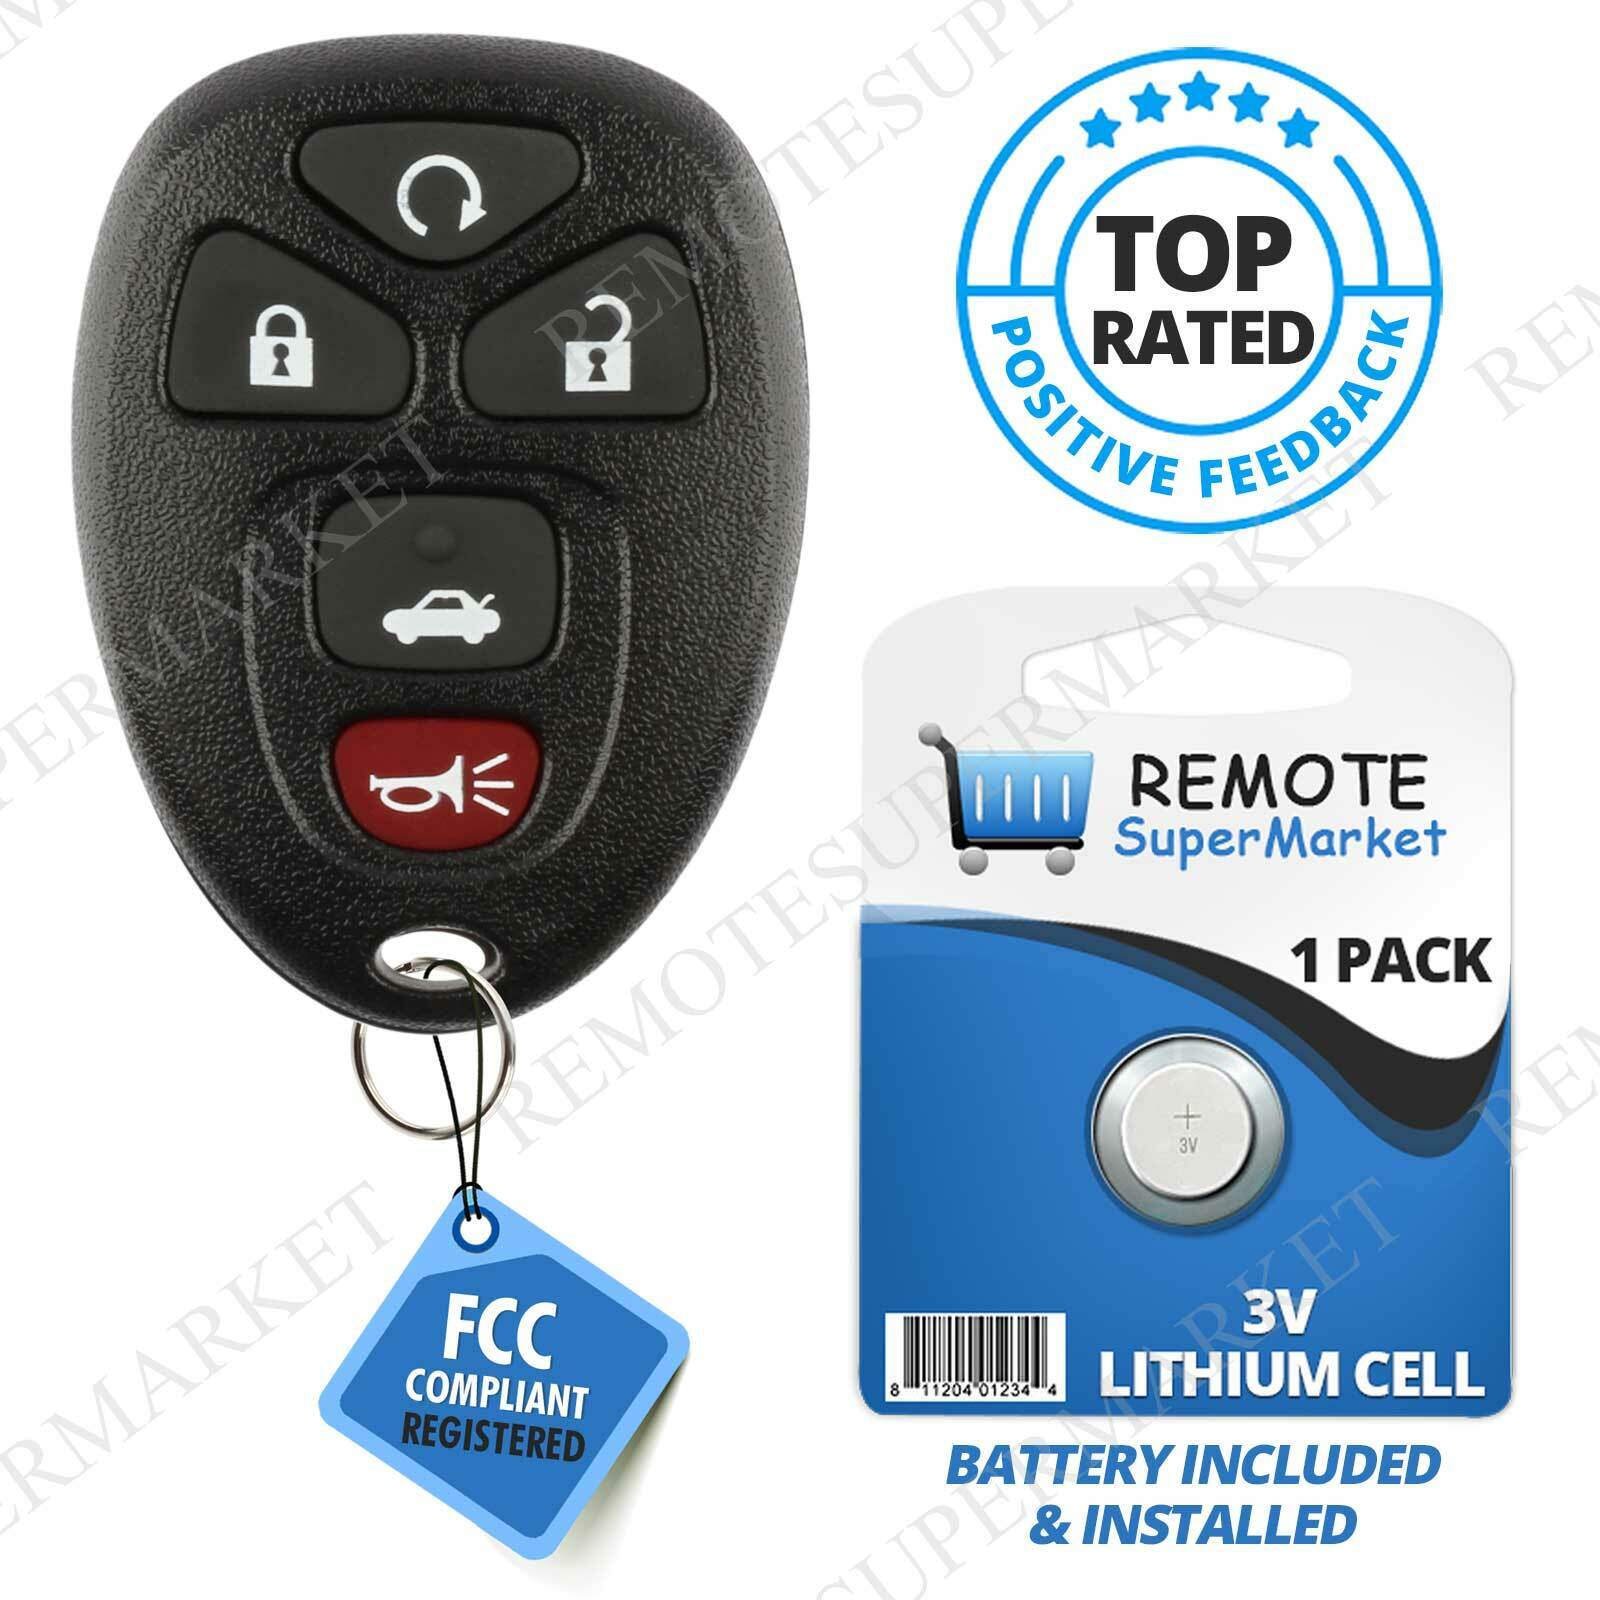 Replacement for 2006-2013 Chevy Impala 06-07 Monte Carlo Remote Car Key Fob 5b